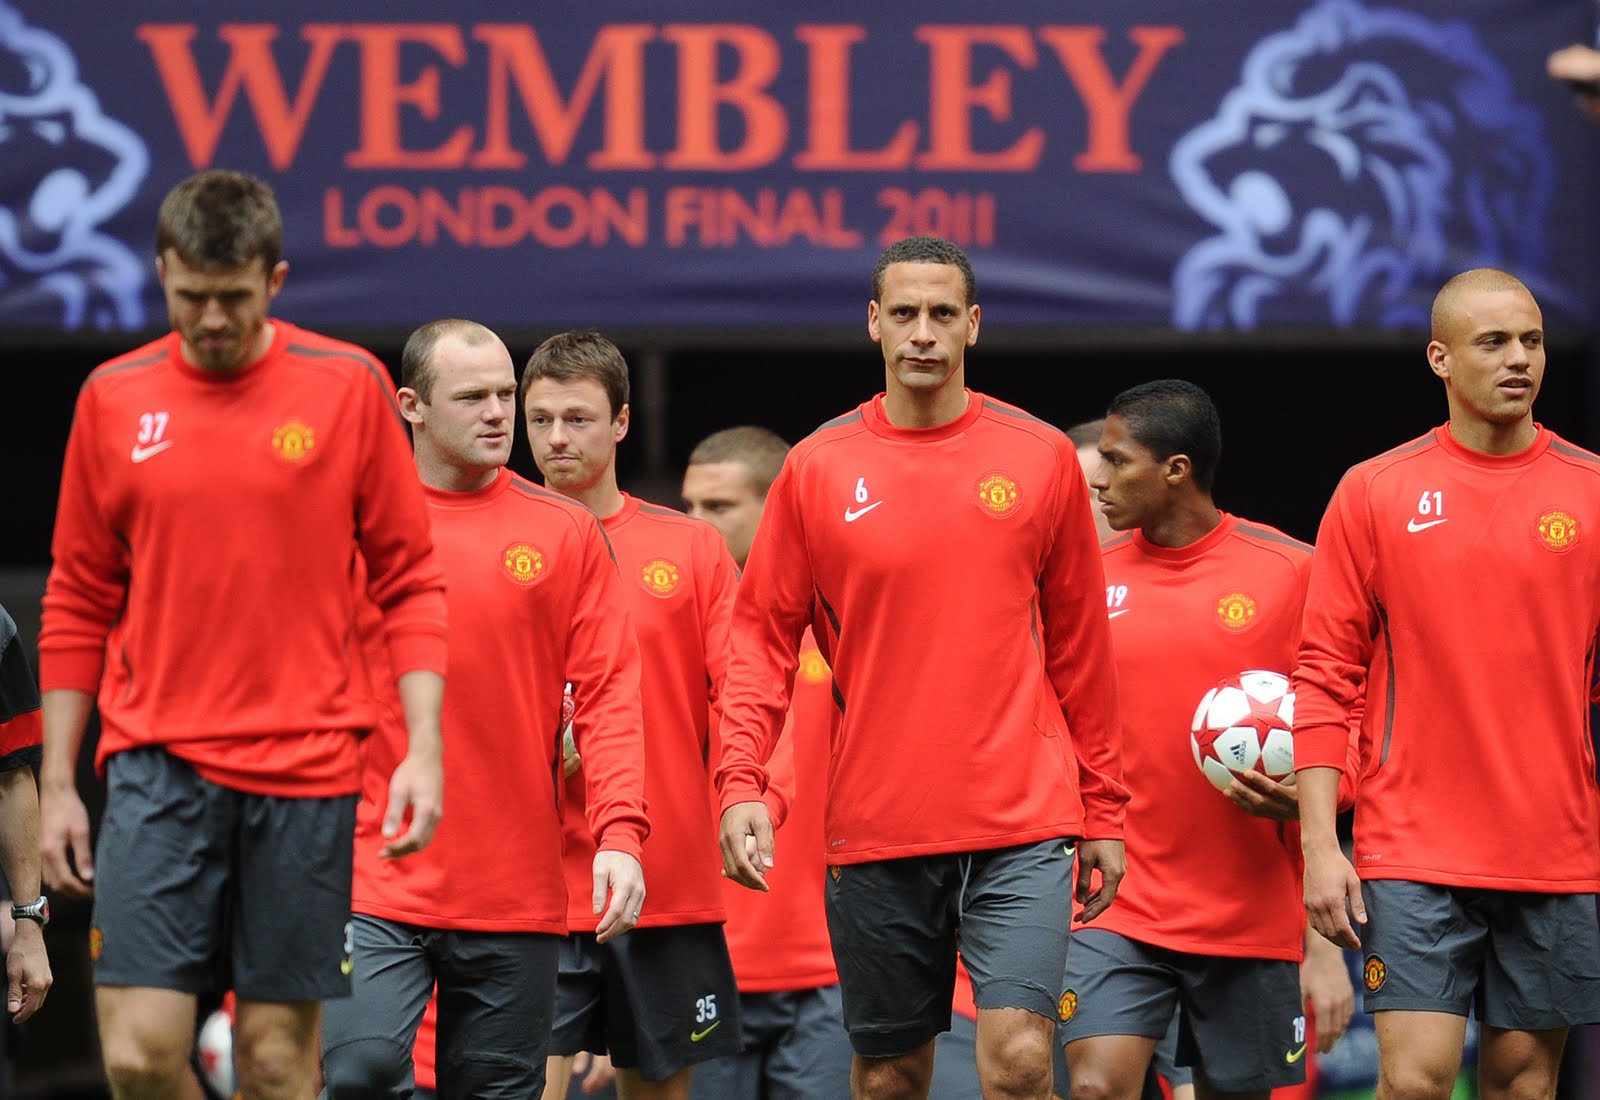 Man Utd At Wembley | Manchester United Wallpaper For Android: Man Utd ...